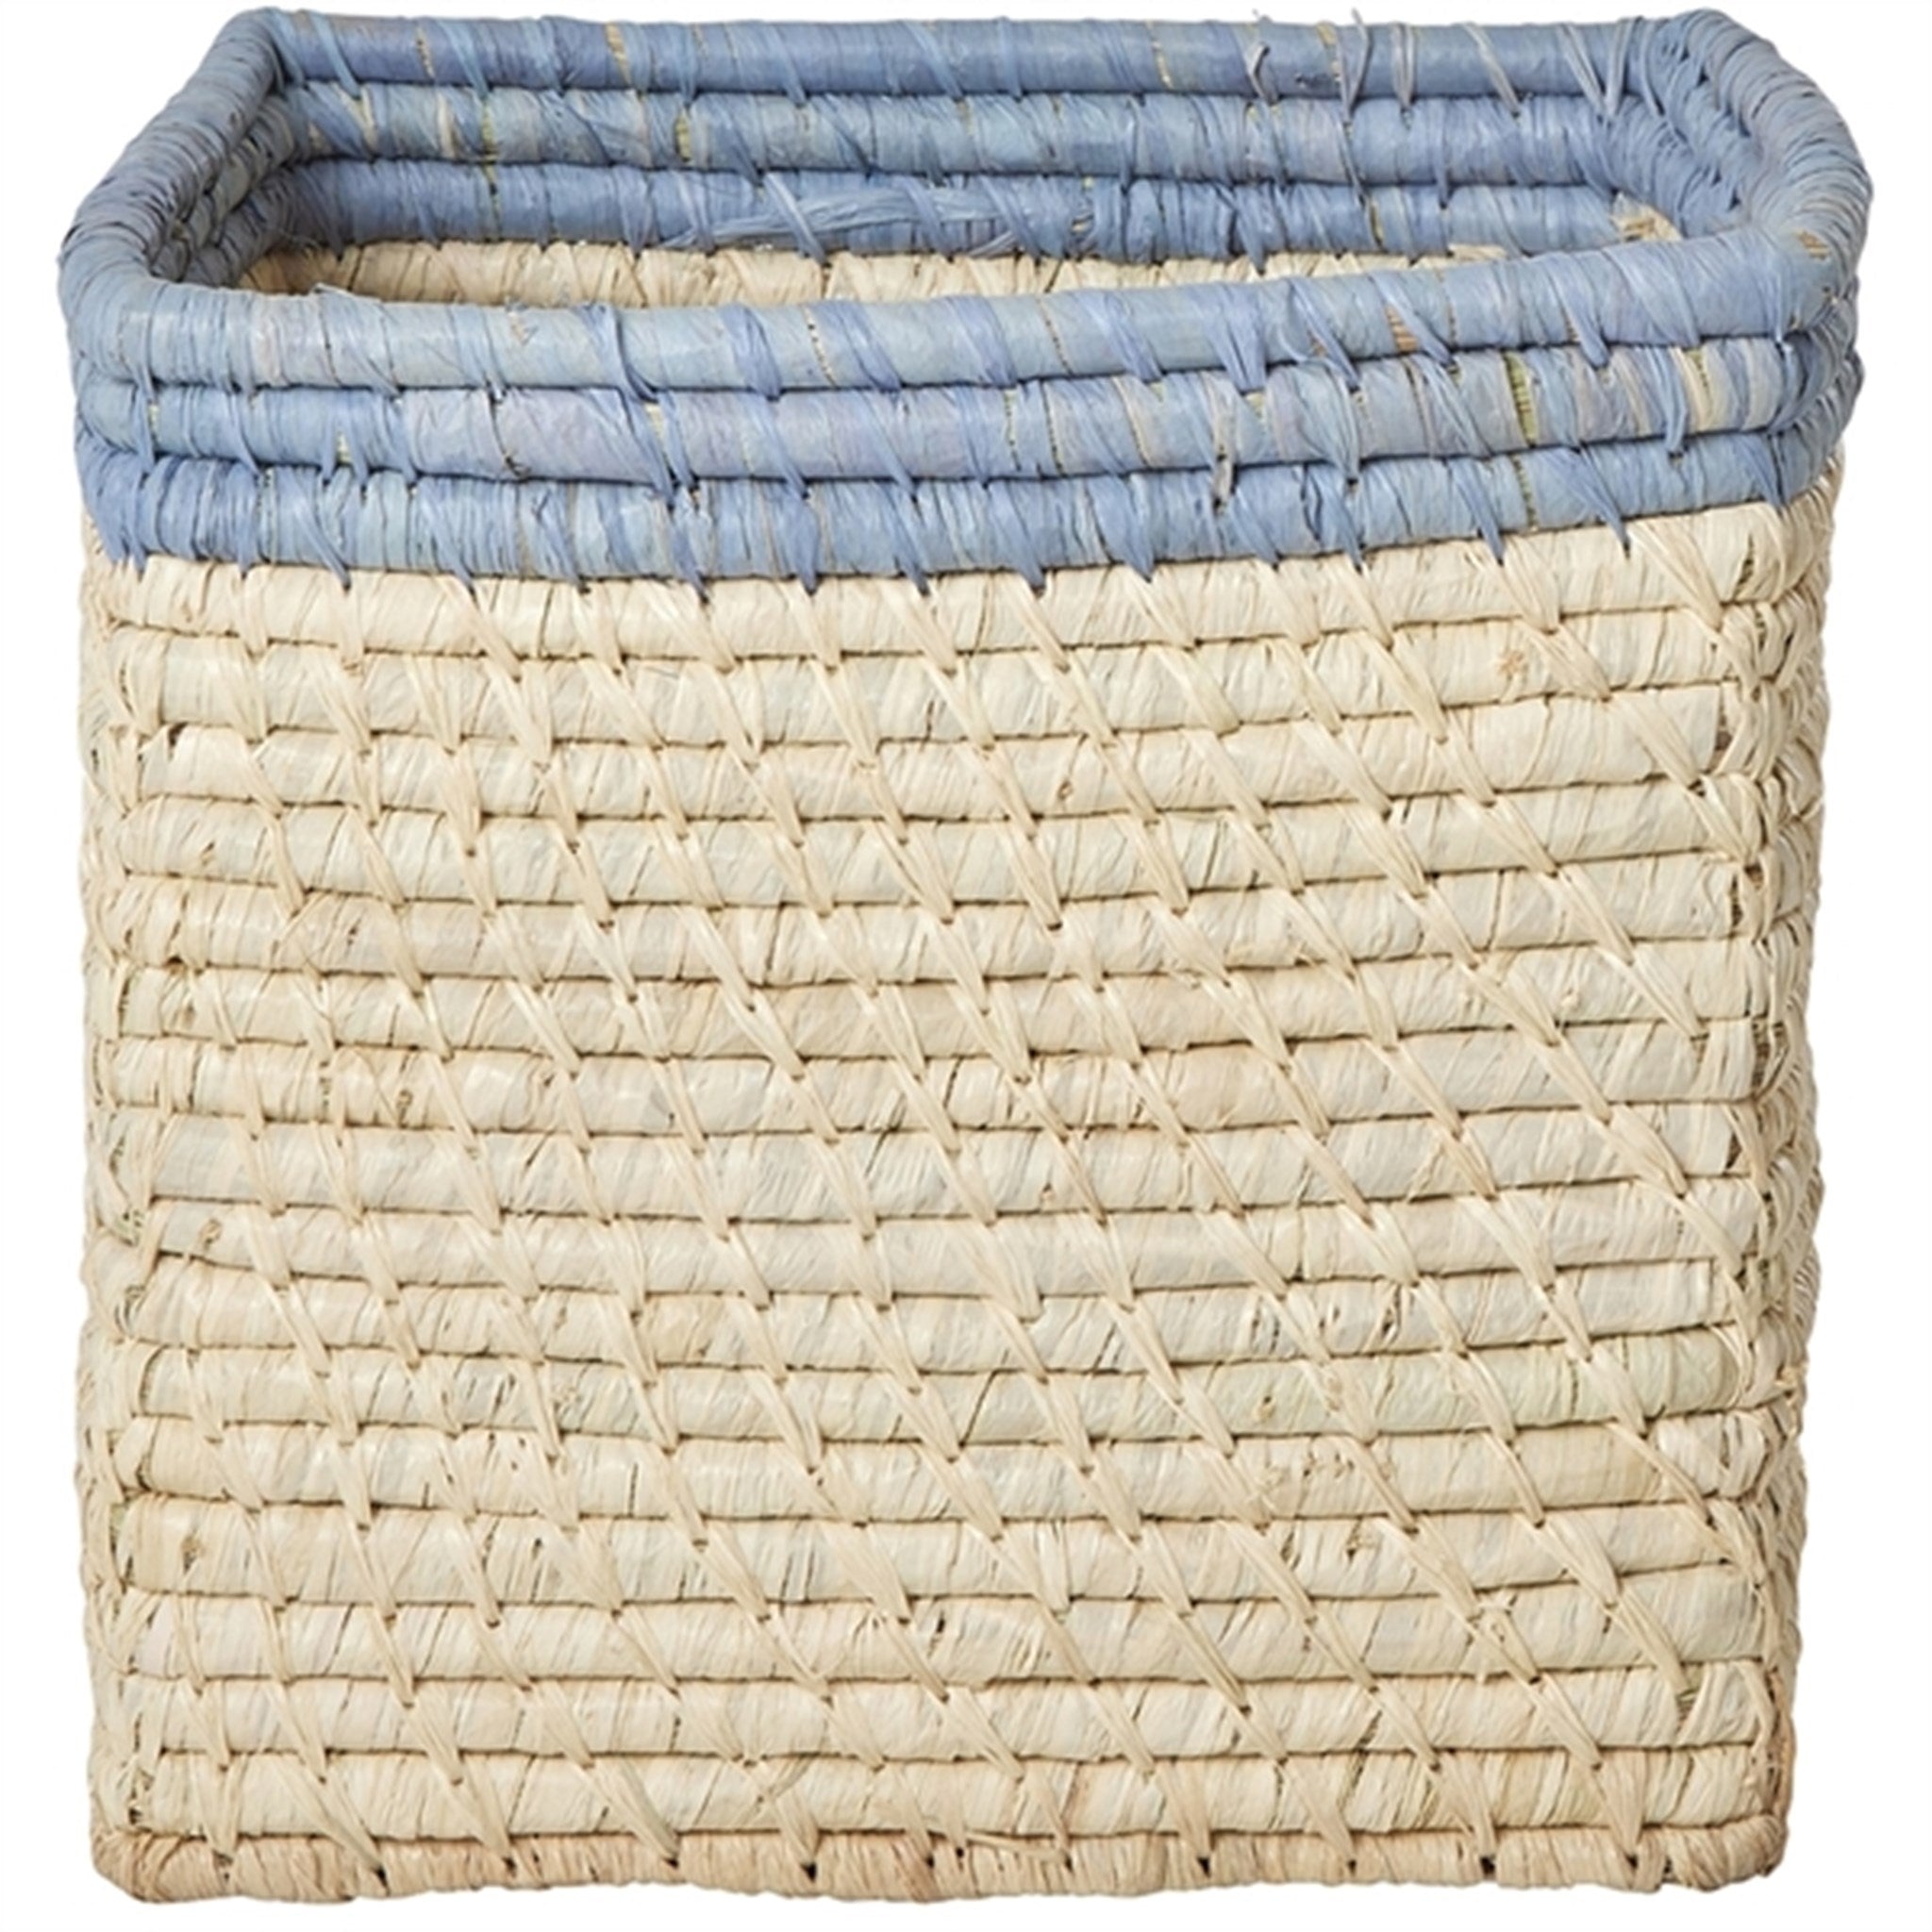 RICE Nature/Blue Basket for Storage Small